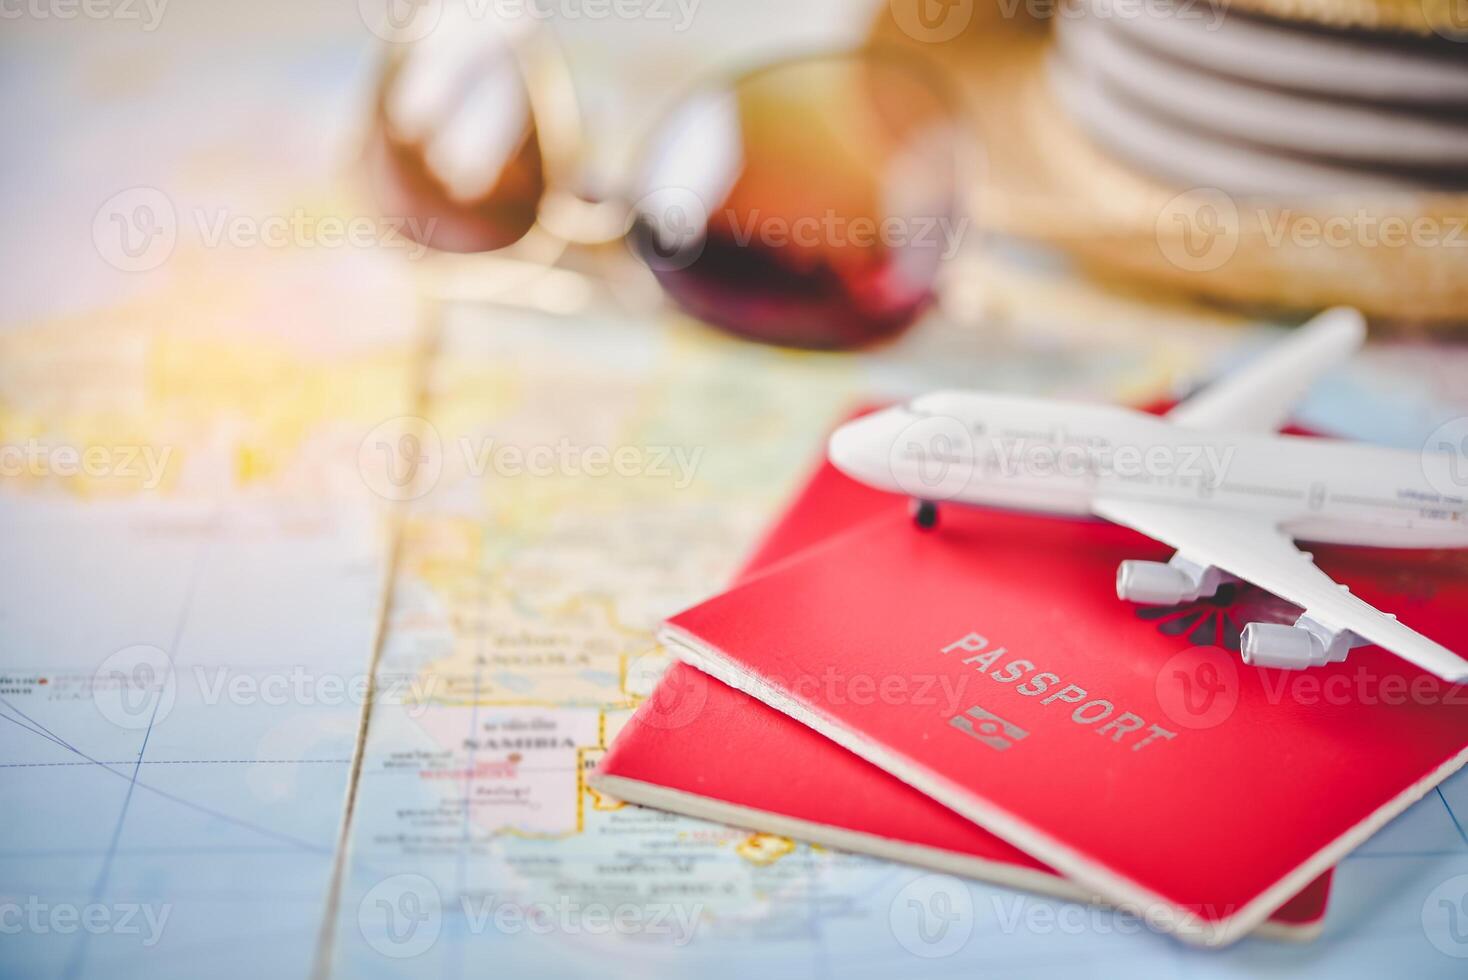 Passport placed on the map concept tourism planning and equipment needed for the trip photo